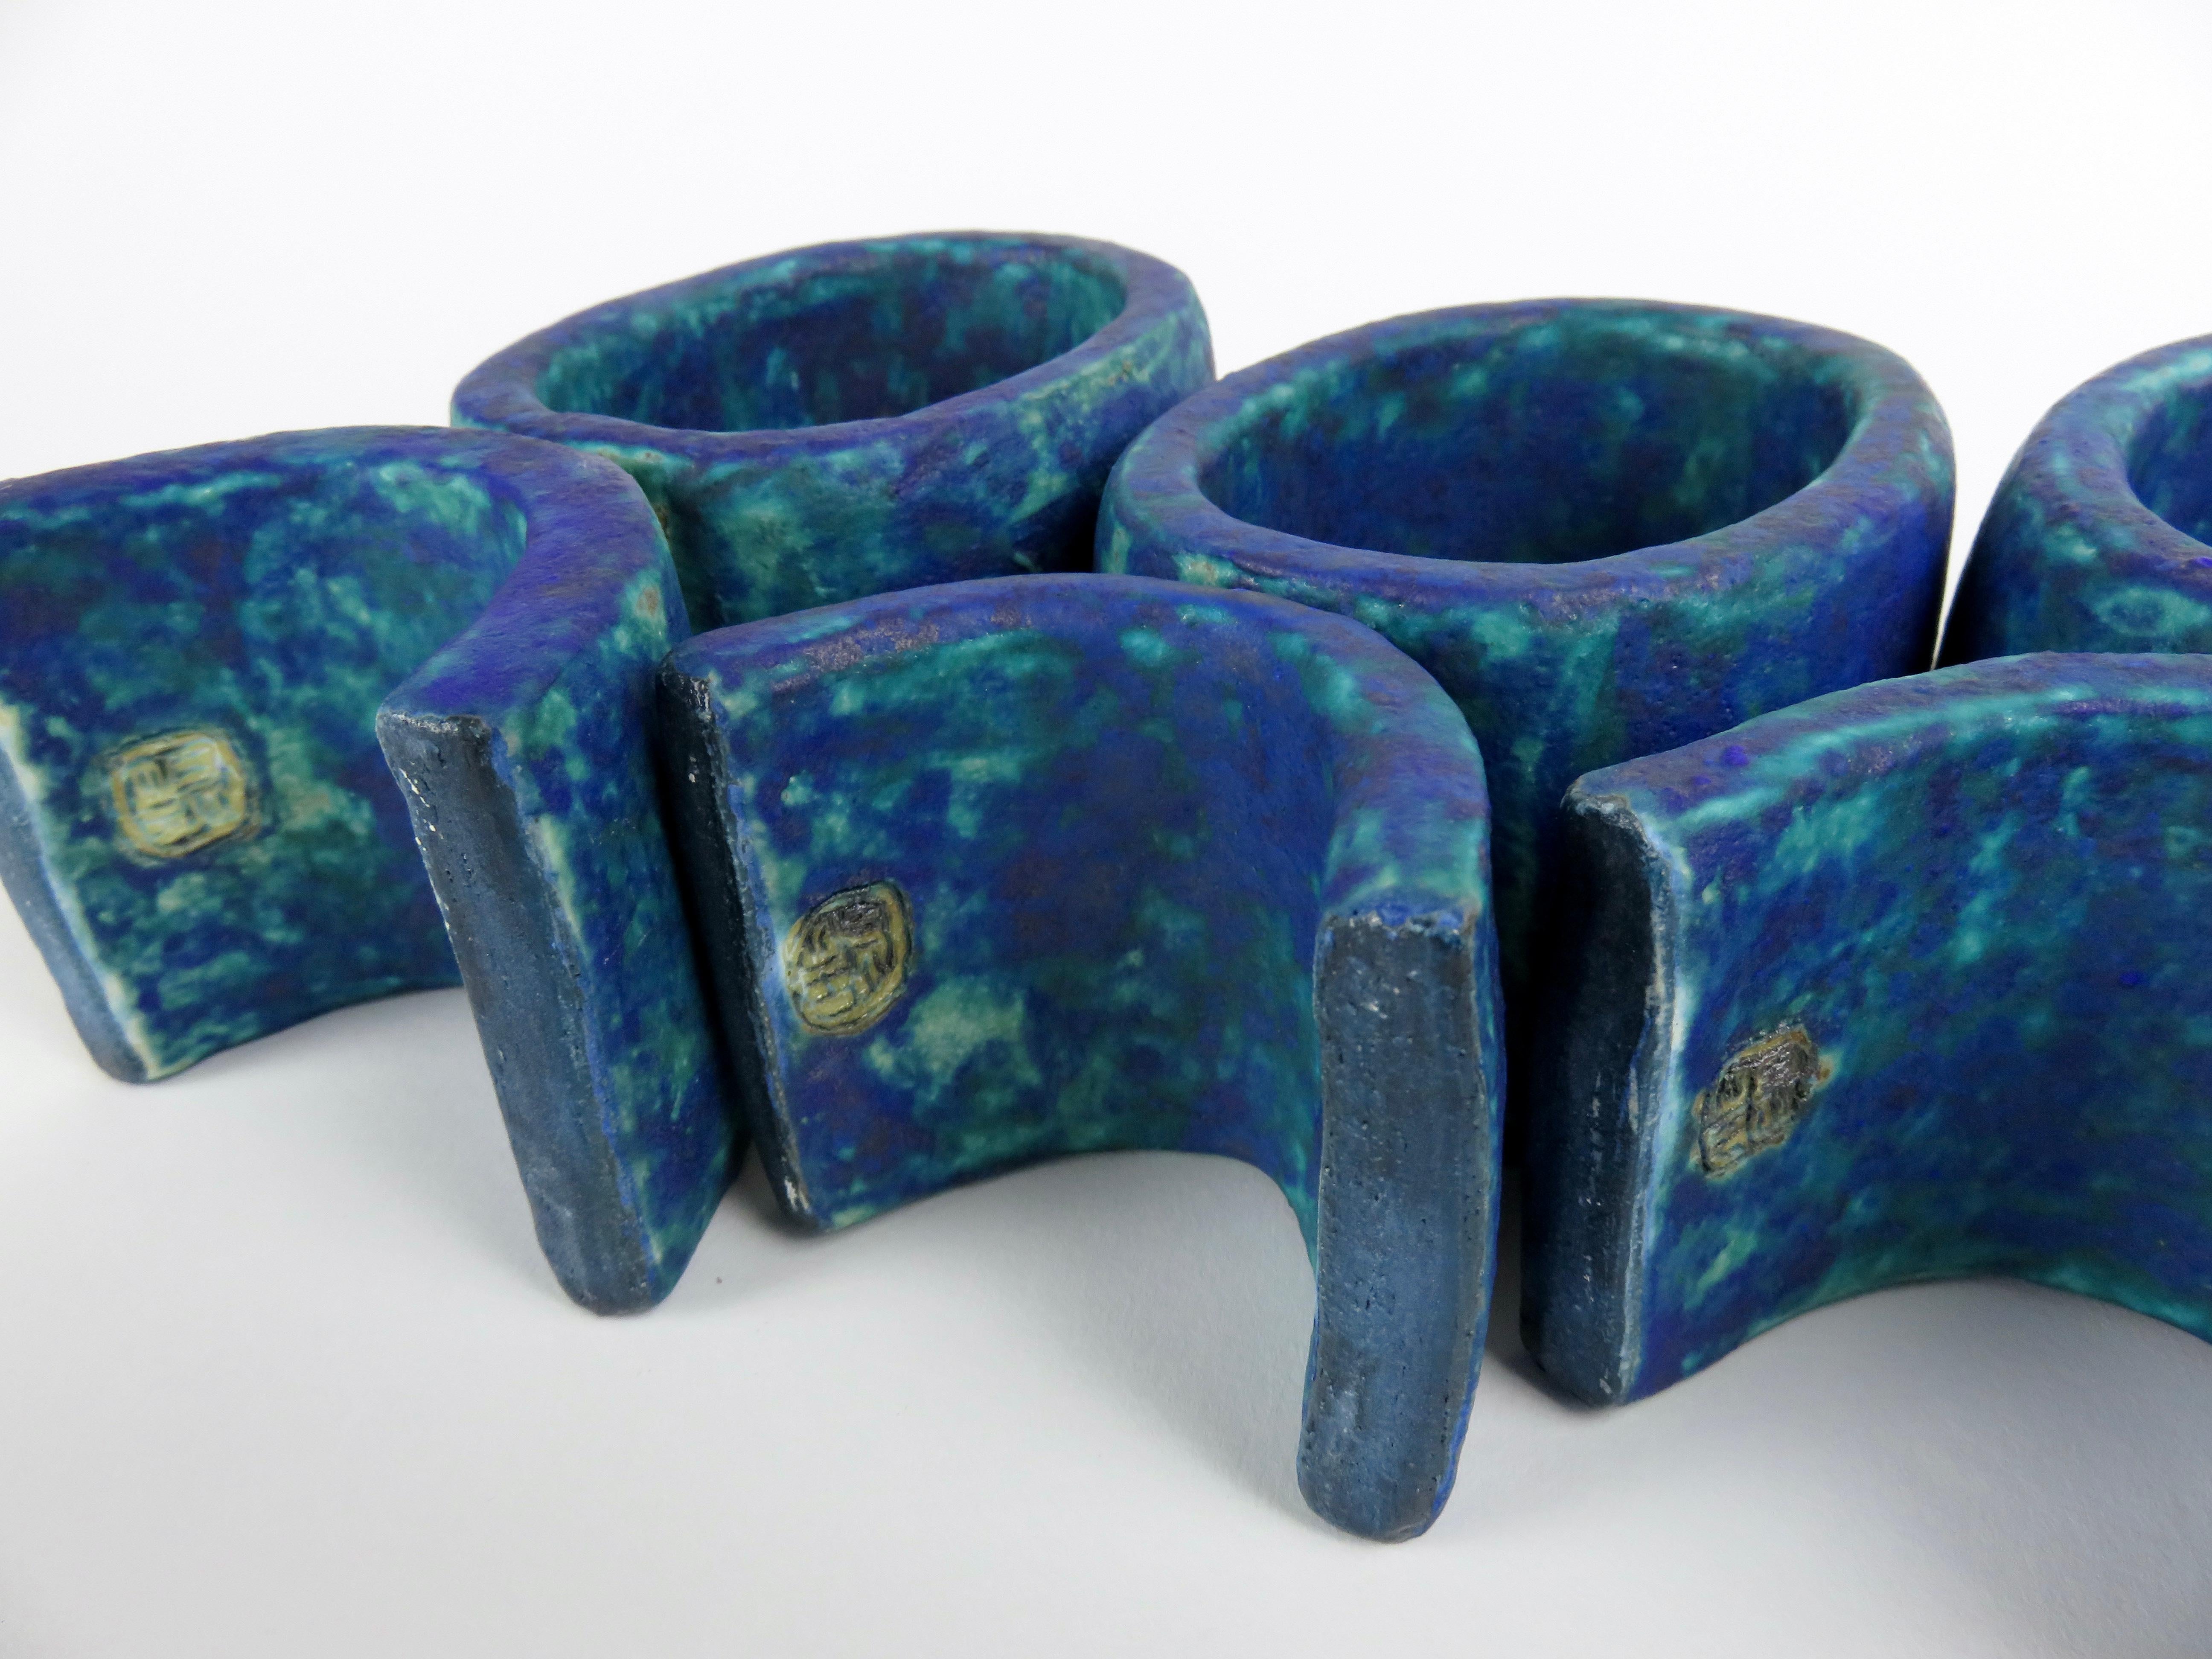 Mottled Turquoise and Deep Blue, 3 Ceramic Totems, Single Rings on Curved Legs For Sale 7